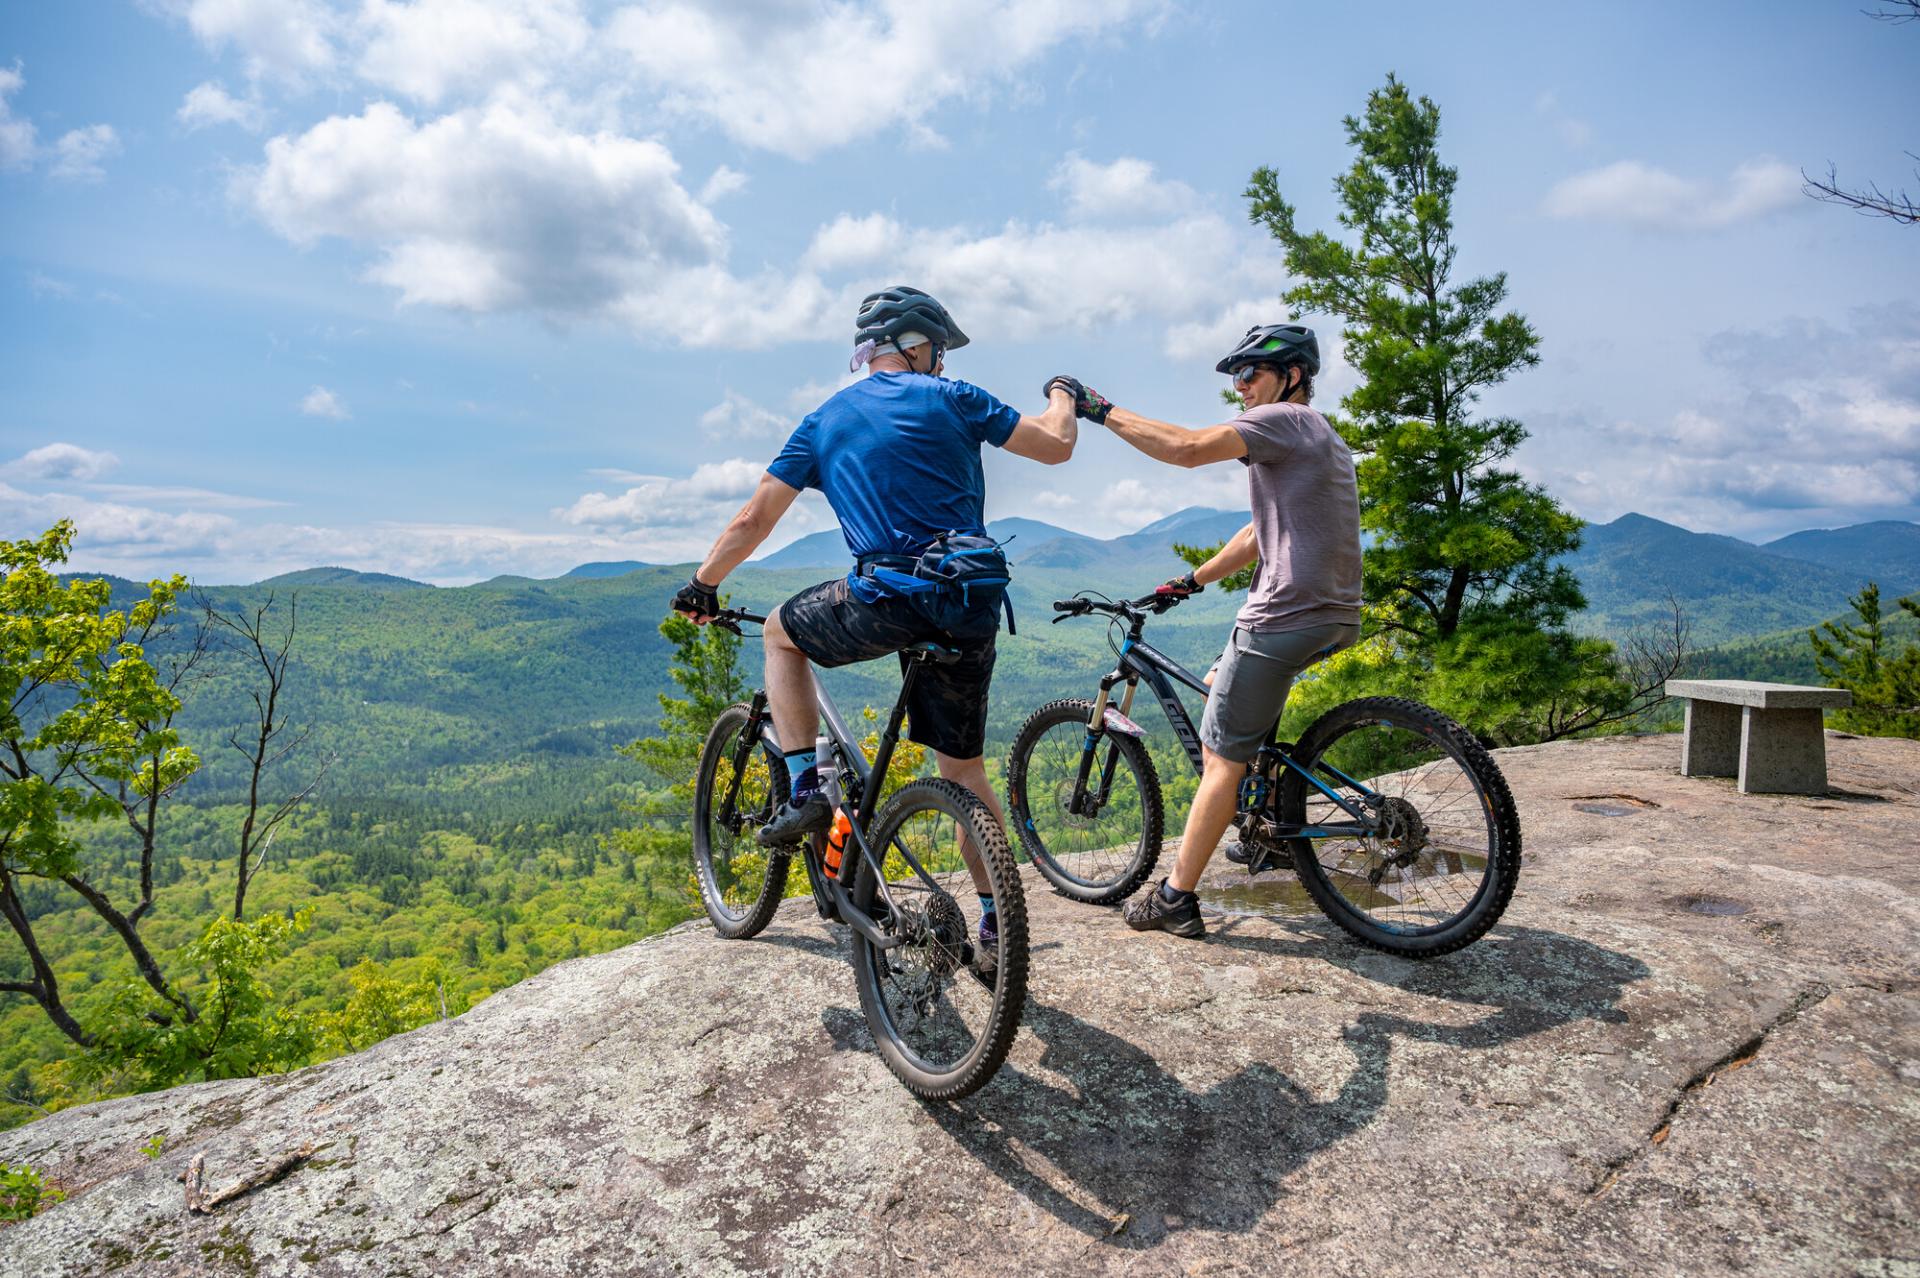 Two mountain bikers fist bump at an overlook